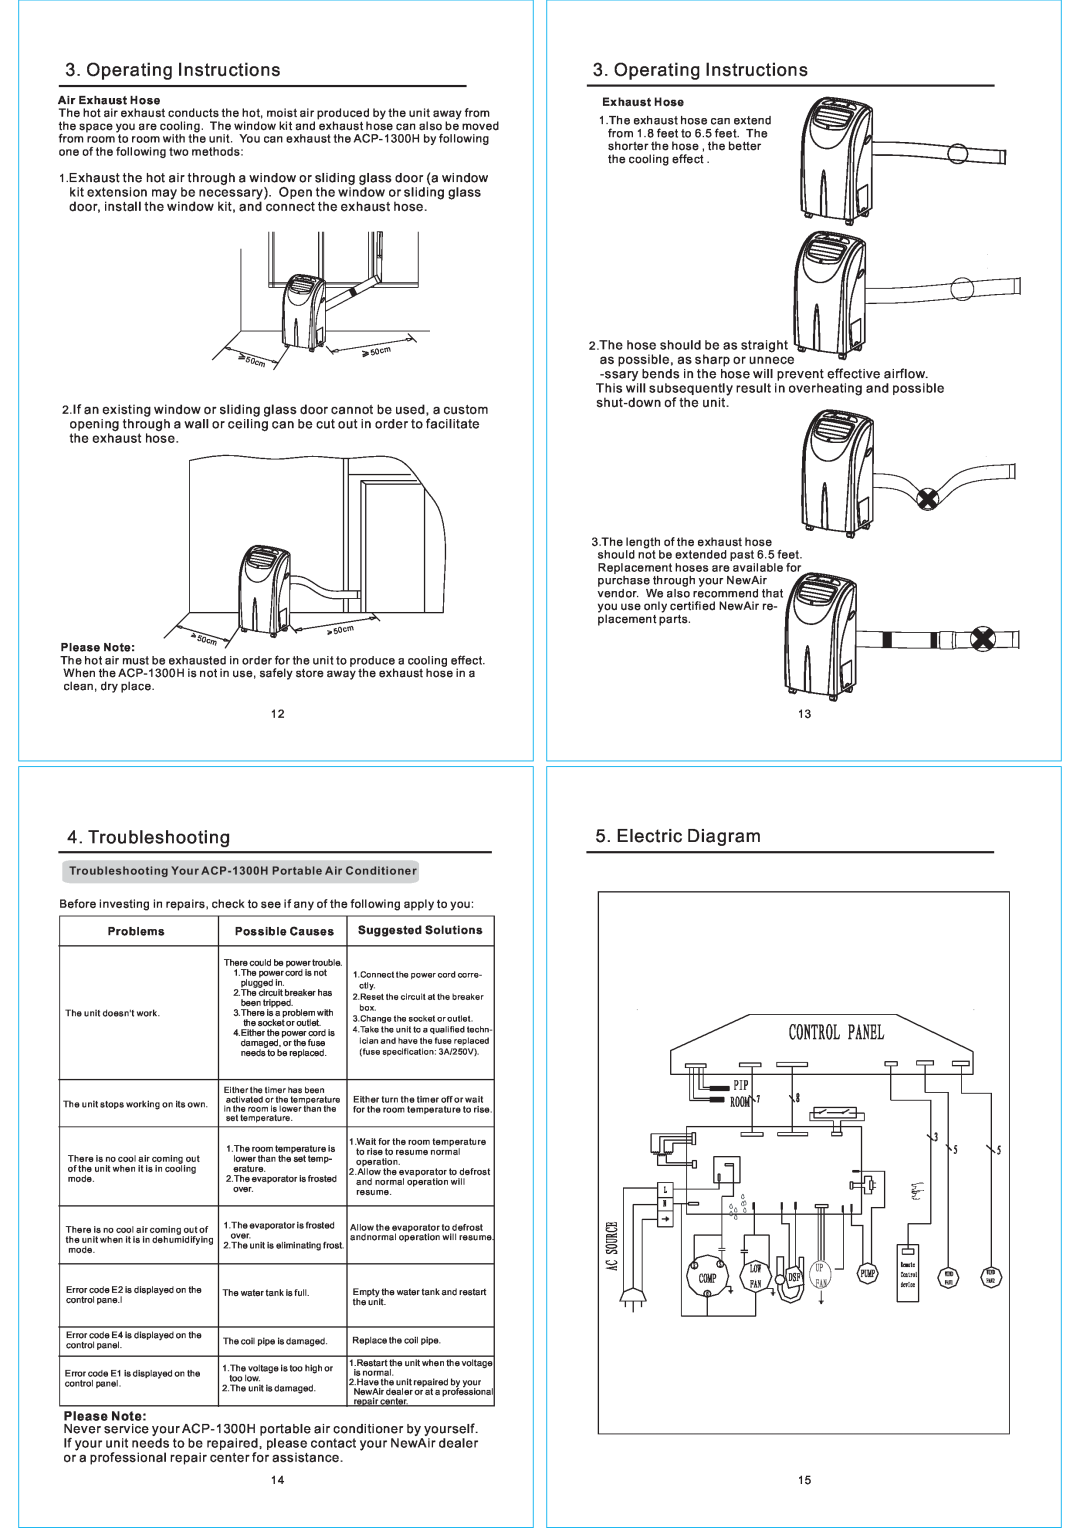 NewAir ACP-1300H owner manual Operating Instructions, Troubleshooting, Electric Diagram, Please Note 